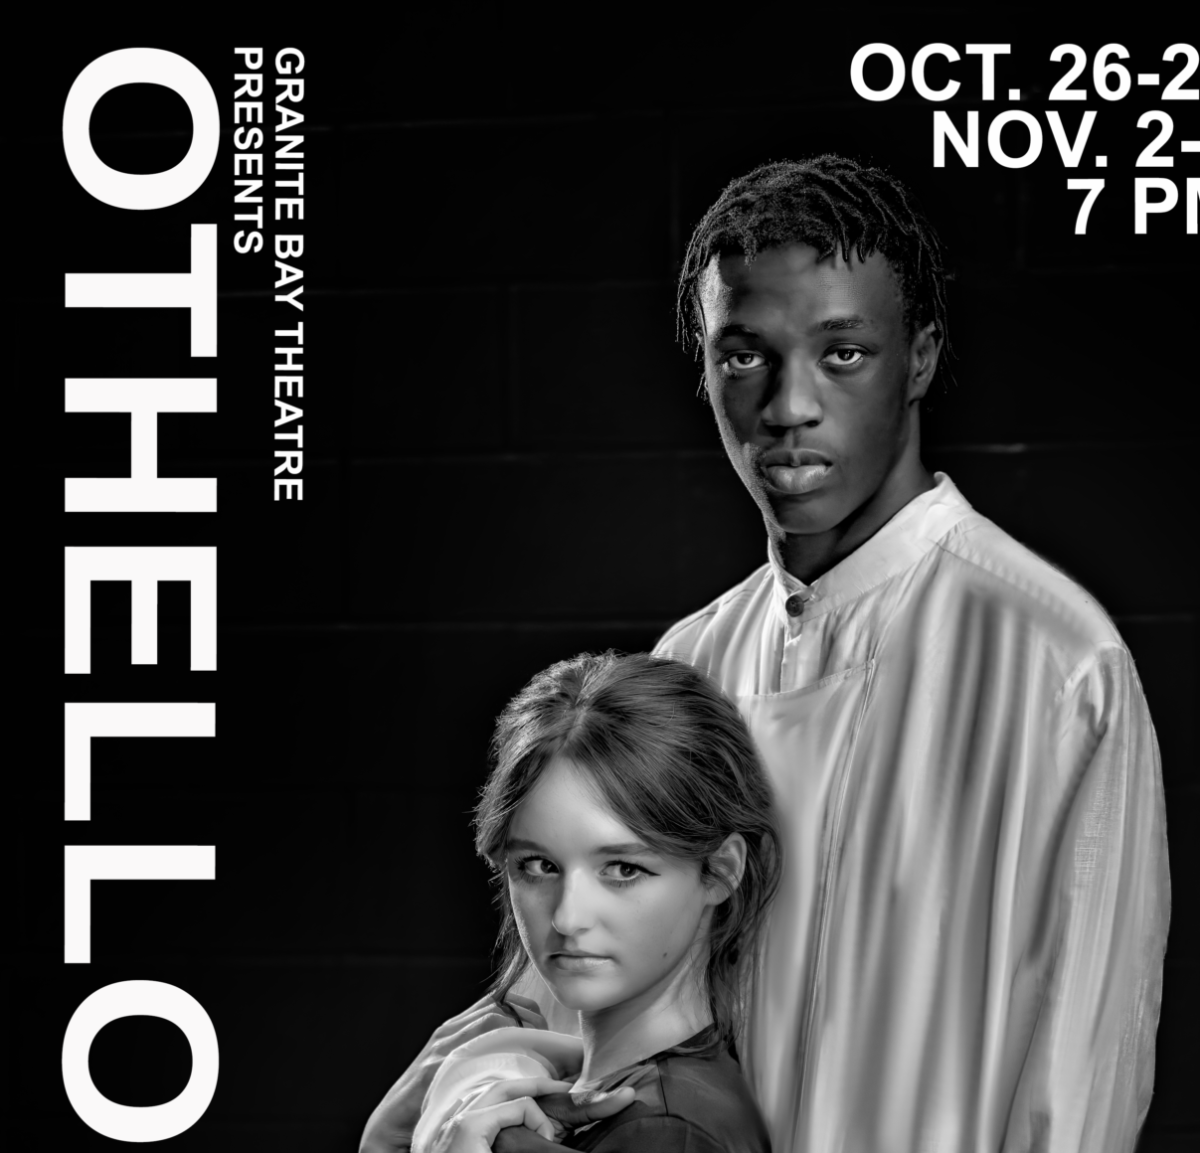 Taking+the+stage+%28Othello+BTS%29